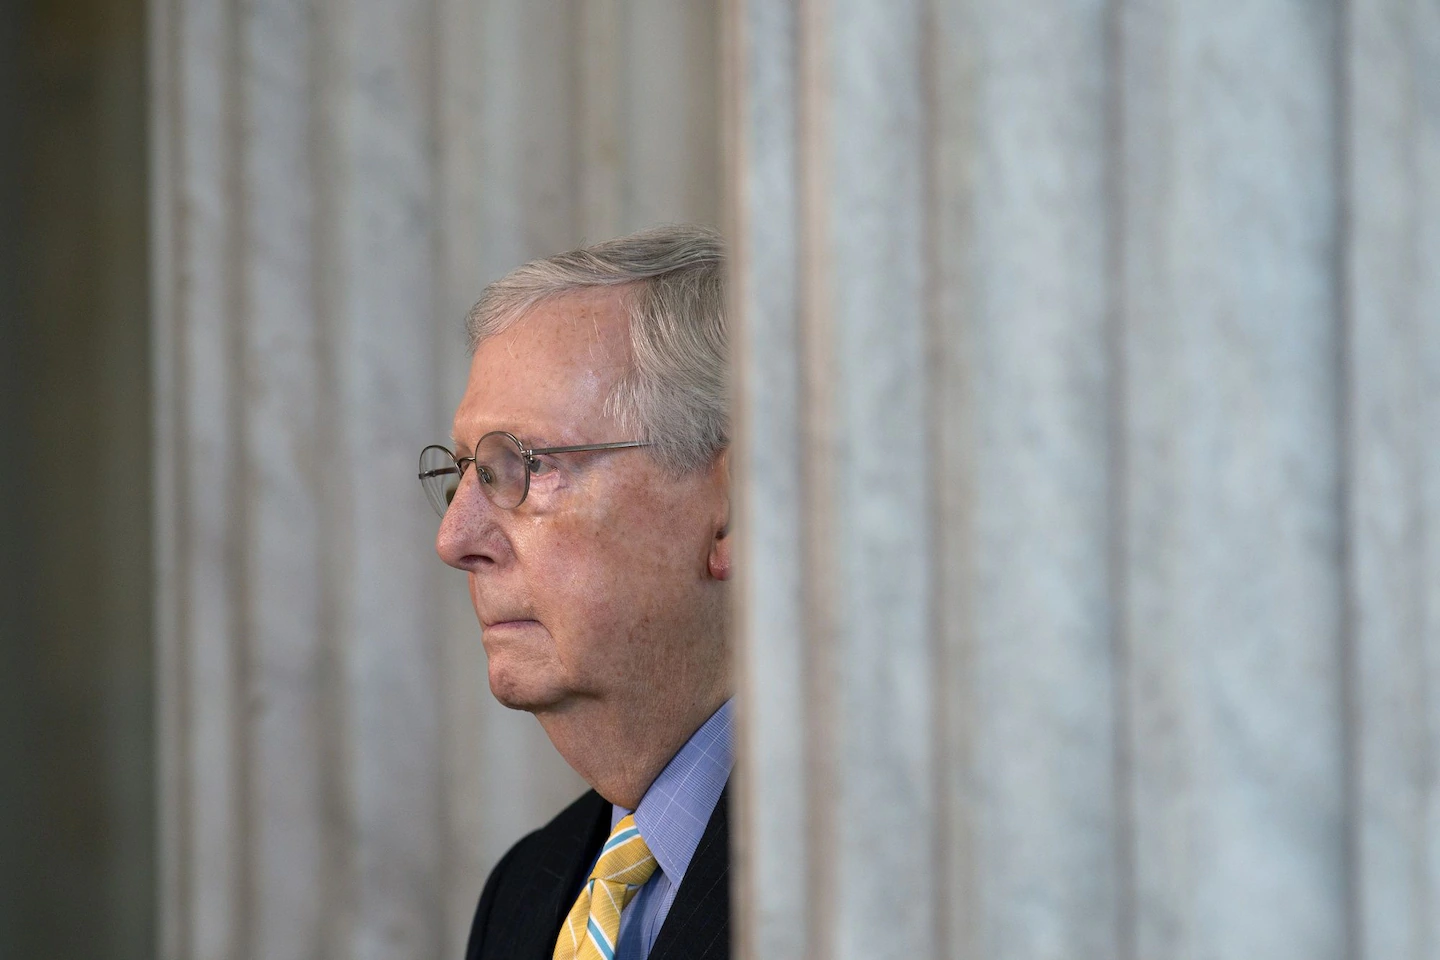 McConnell announces plan to vote on slimmed-down coronavirus relief bill in Senate